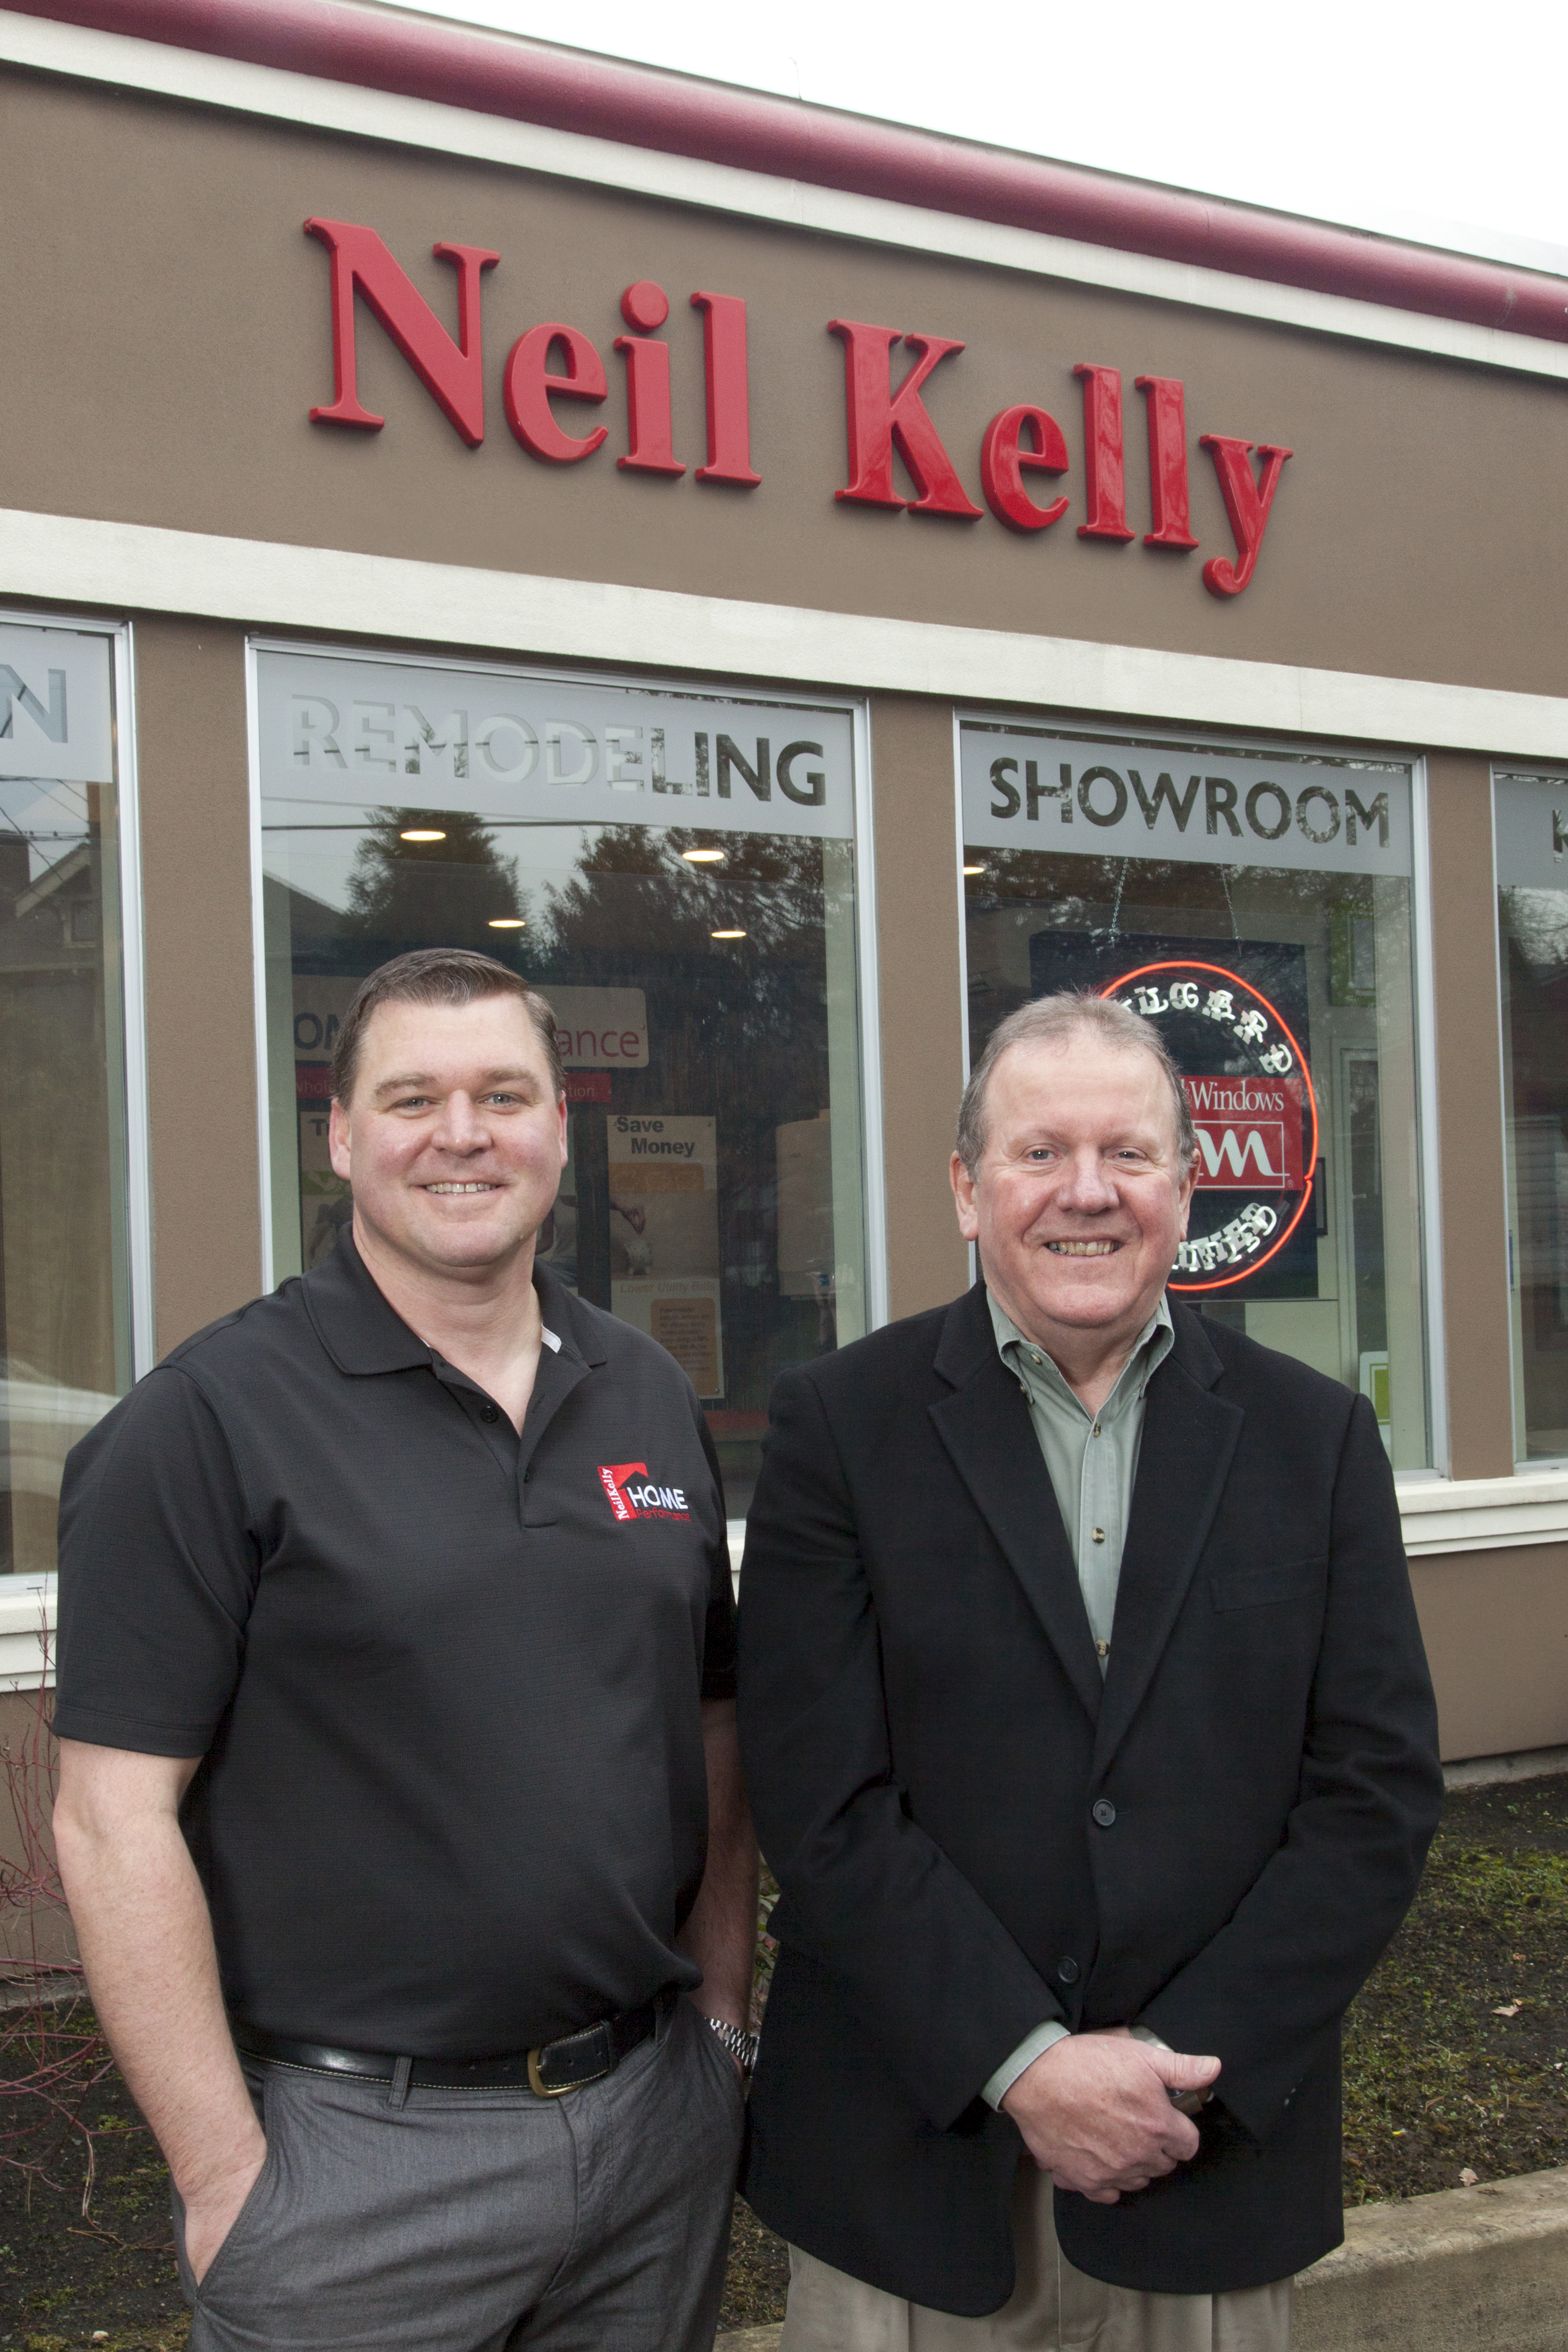 From left: Chad Ruhoff, manager of Home Performance, and Tom Kelly, president of